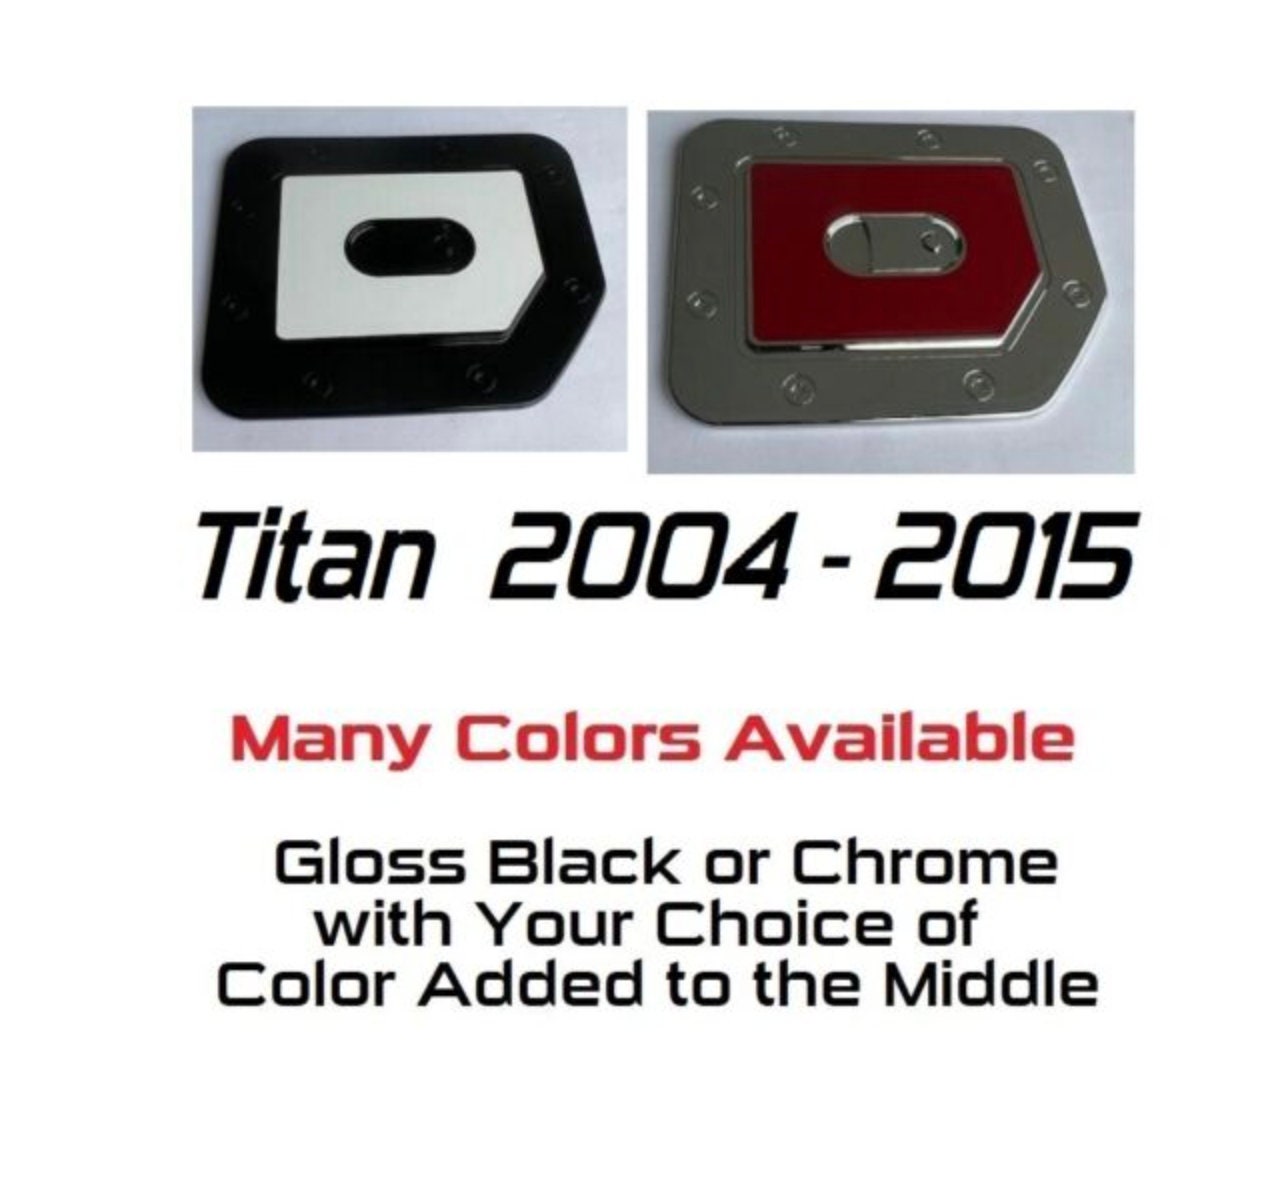 Custom Black OR Chrome Gas Door Overlay / Covers For the 2004-2015 Nissan Titan -- You Choose the Color of the Middle Insert